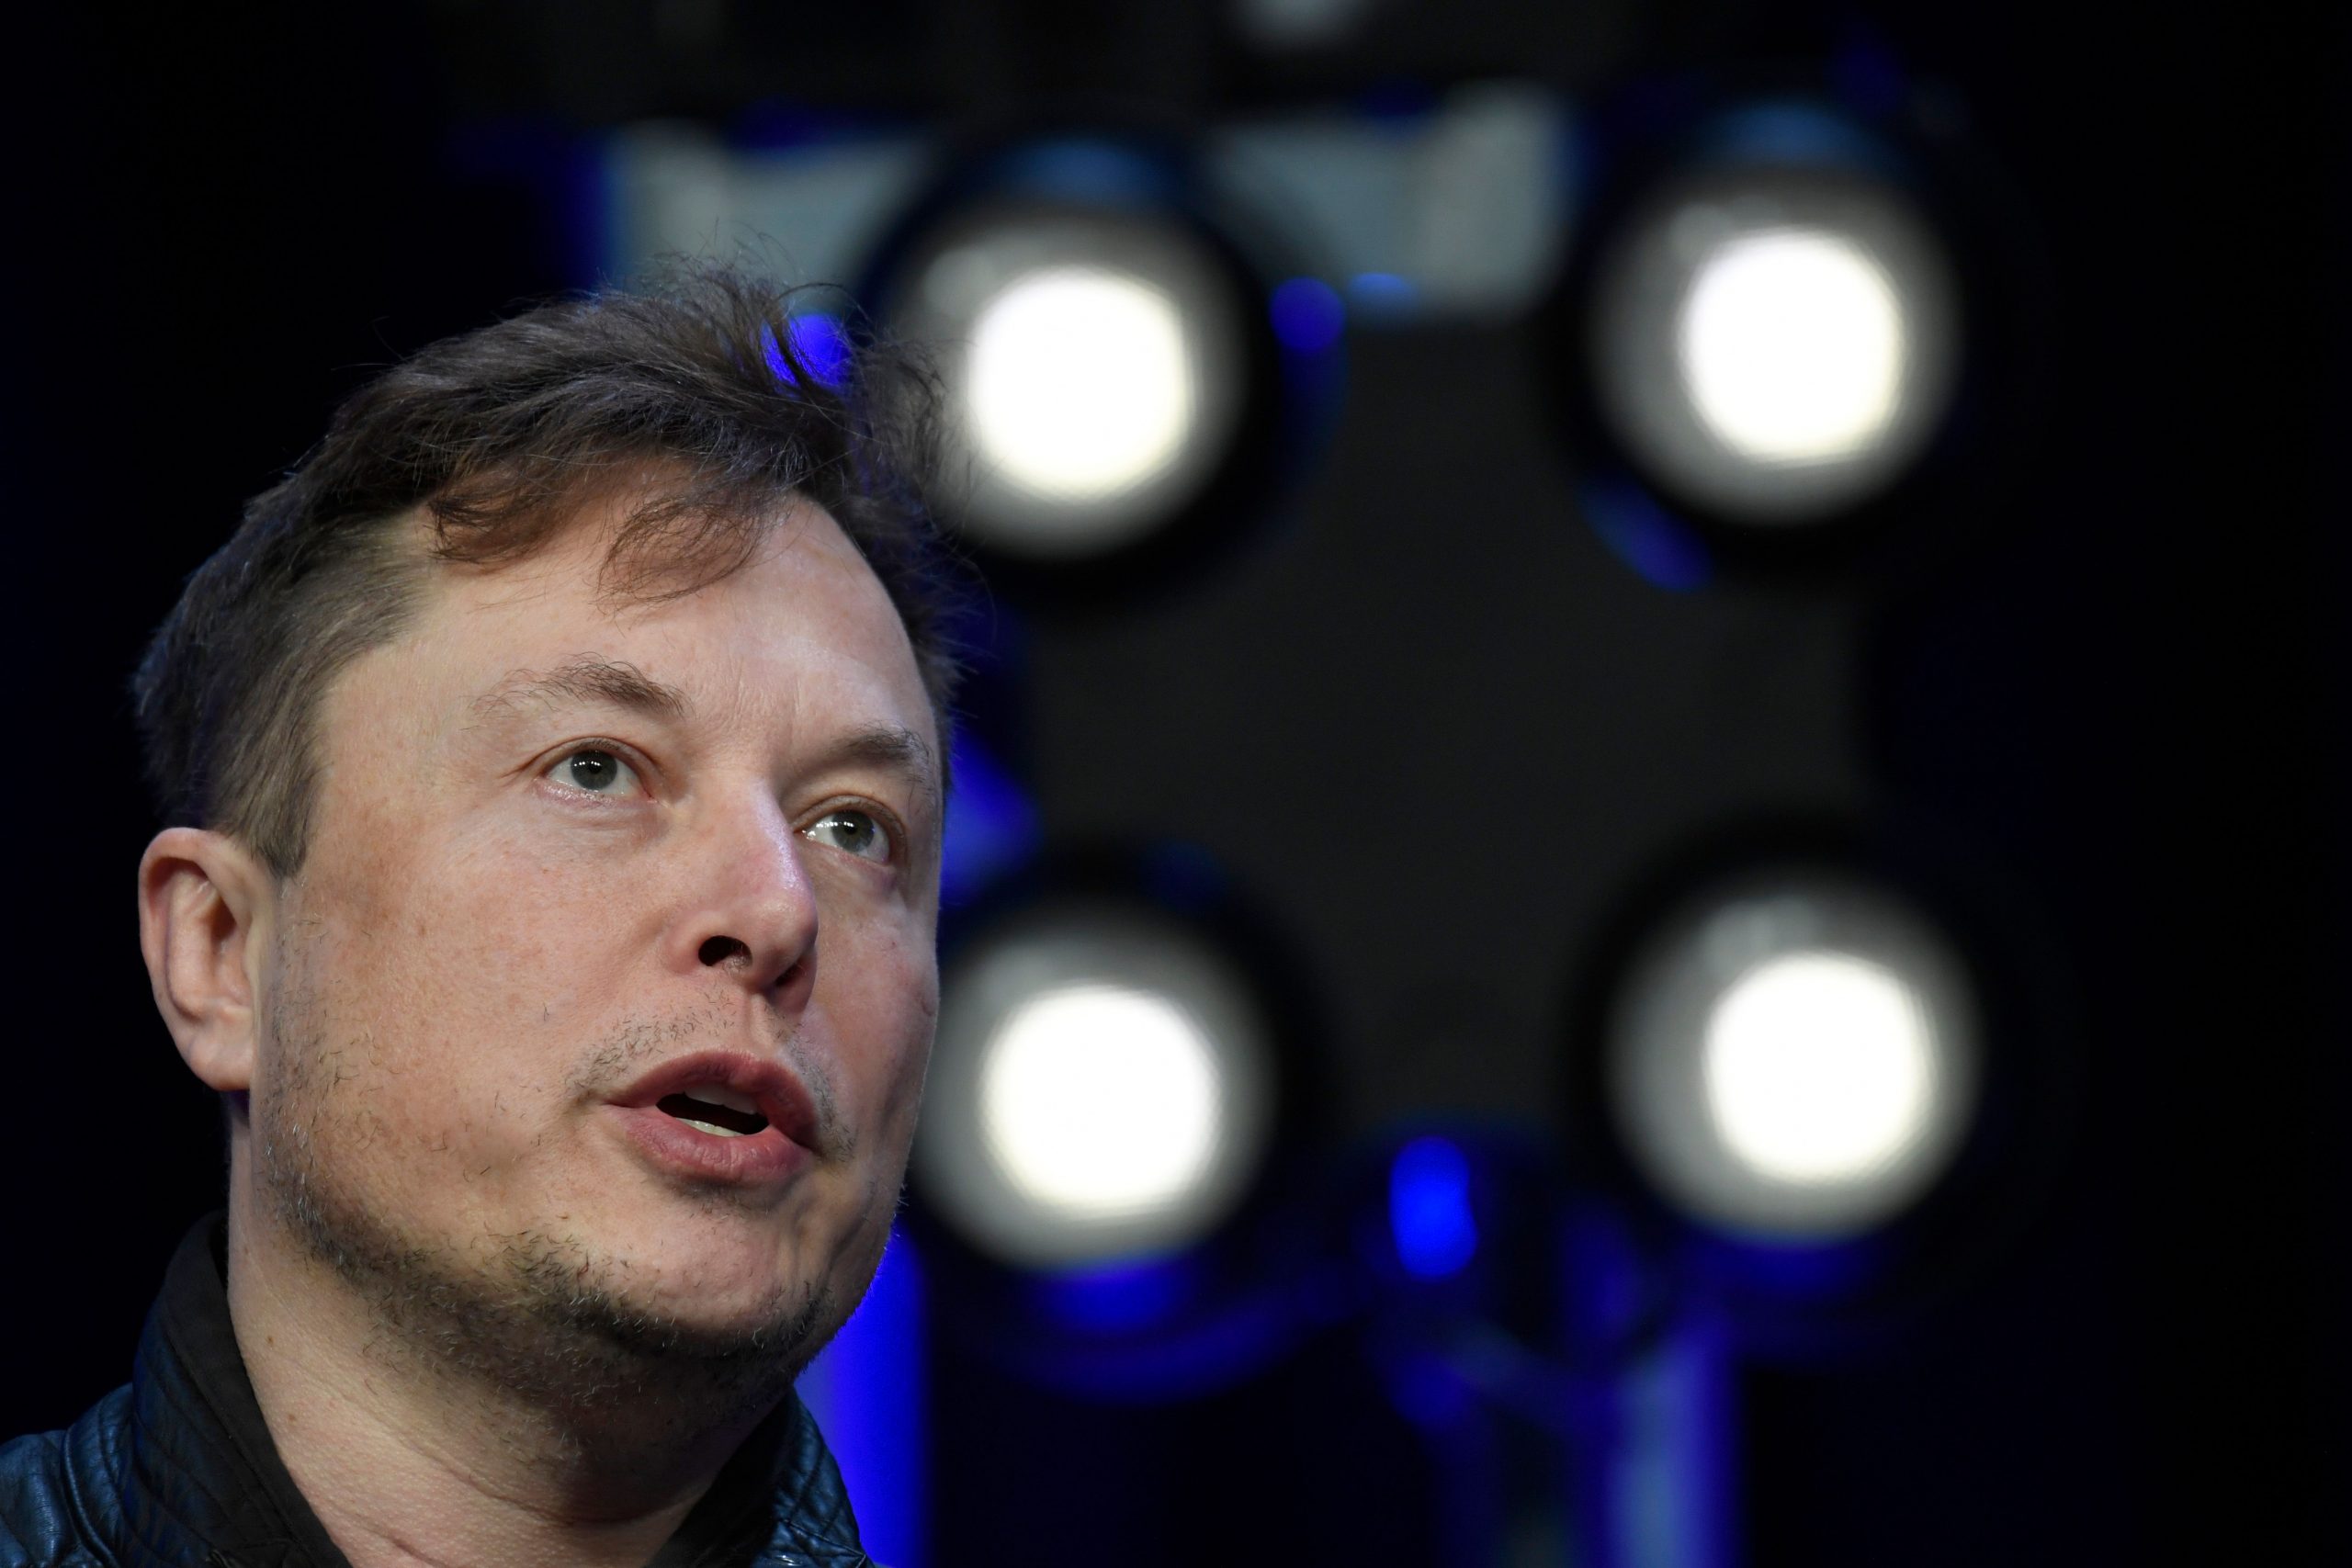 Explained: What Elon Musk at Twitter can mean for users